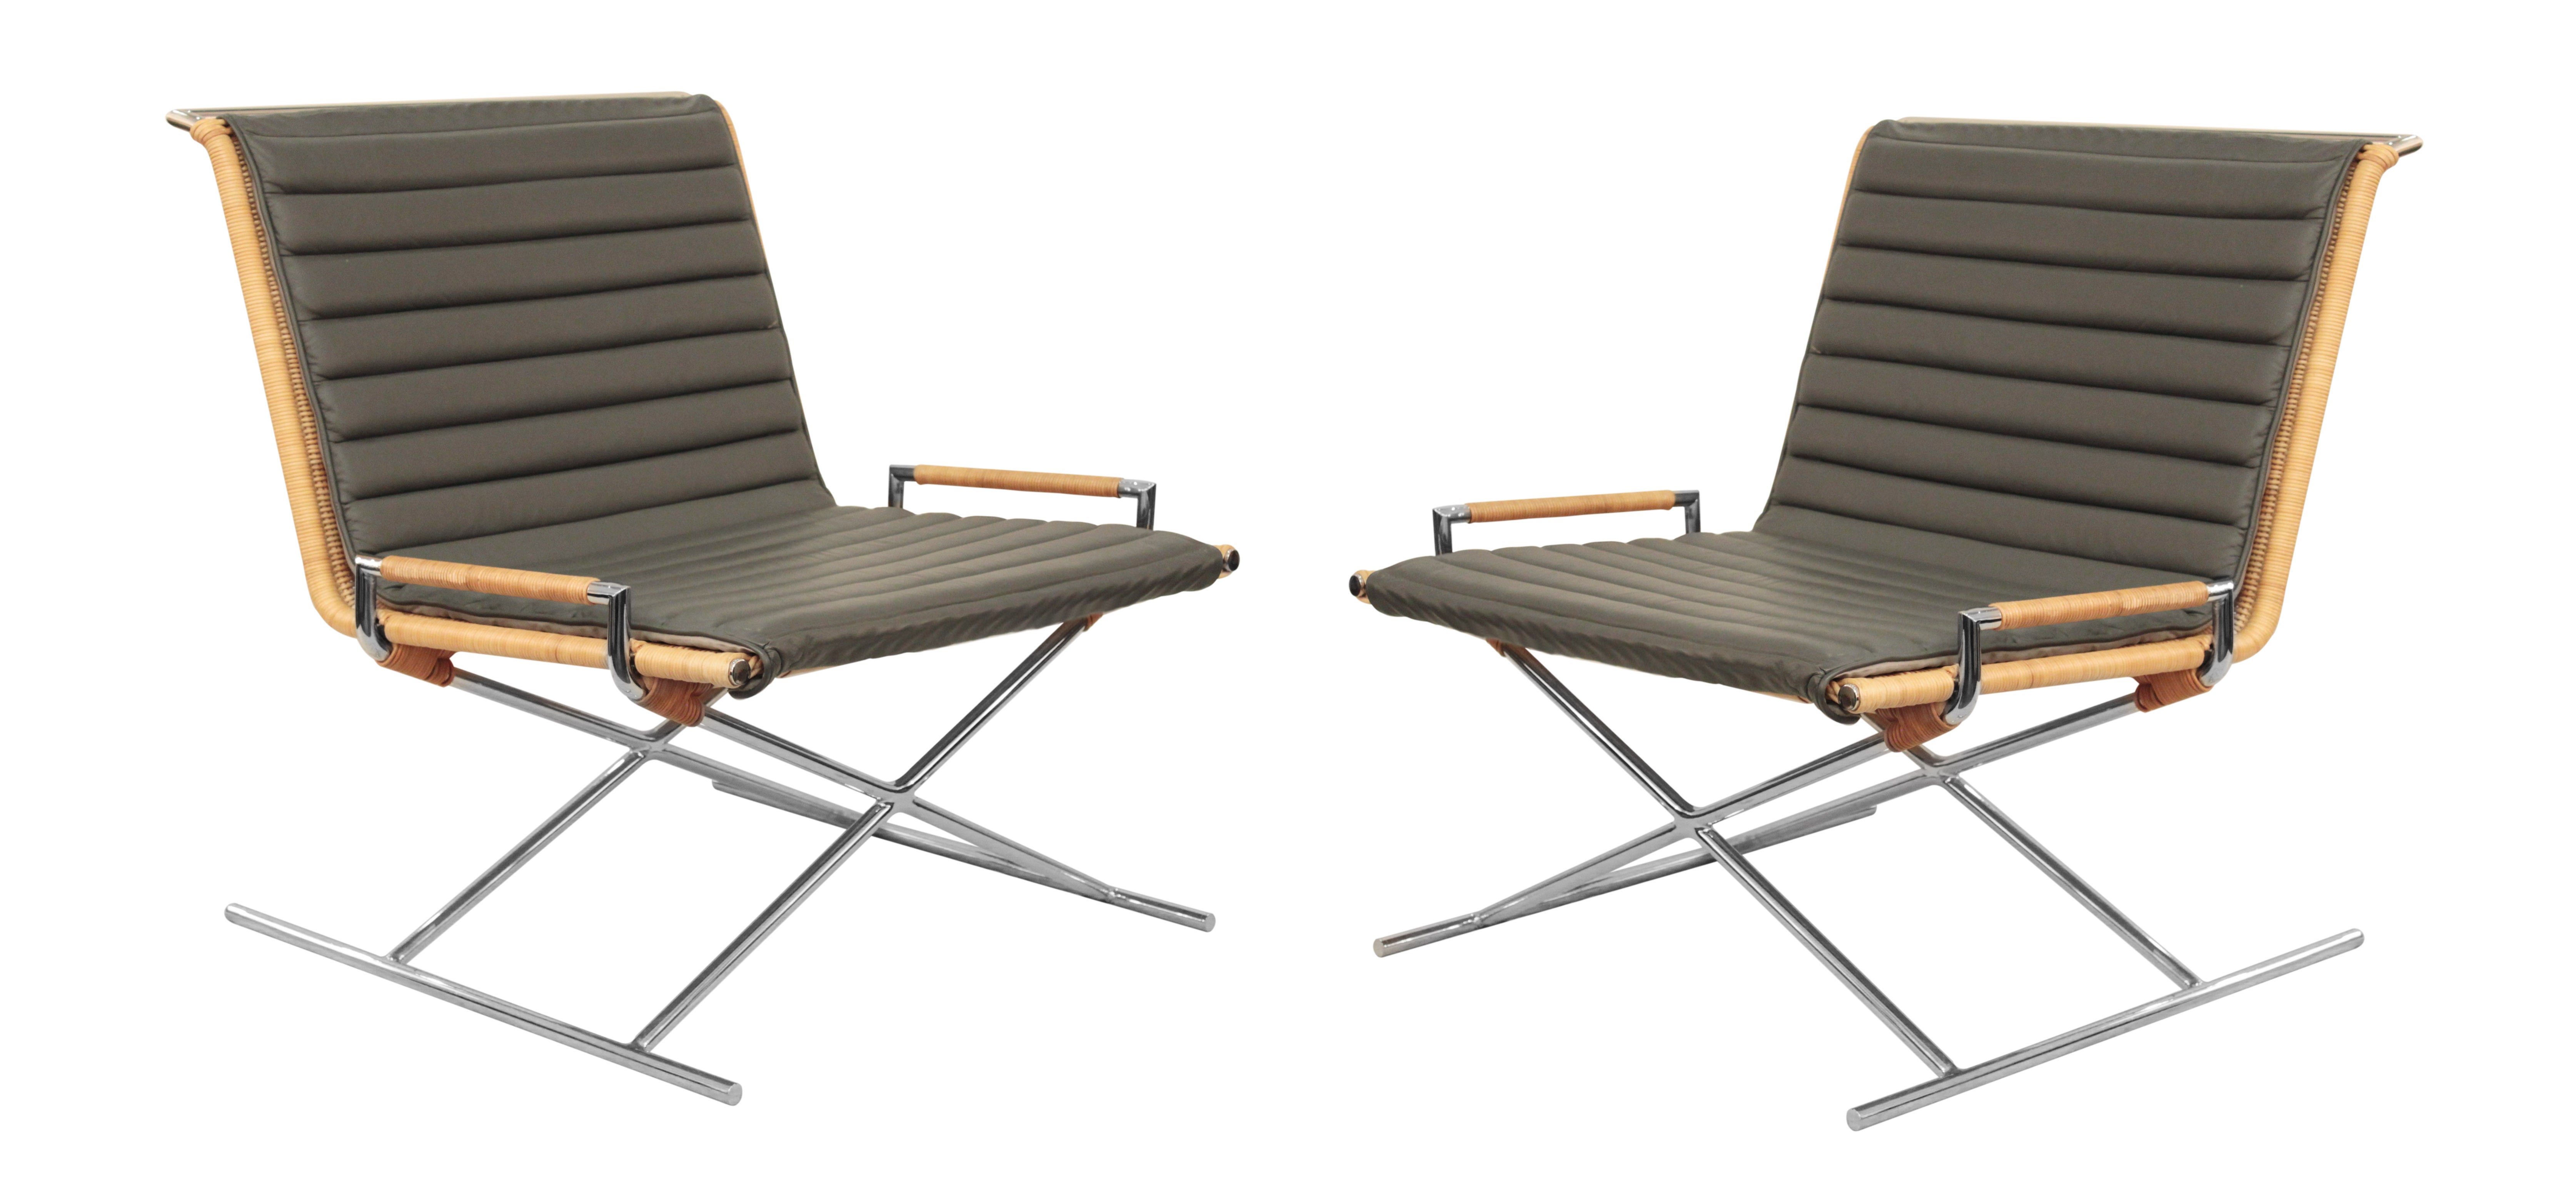 Pair of "Sled Chairs" by Ward Bennett